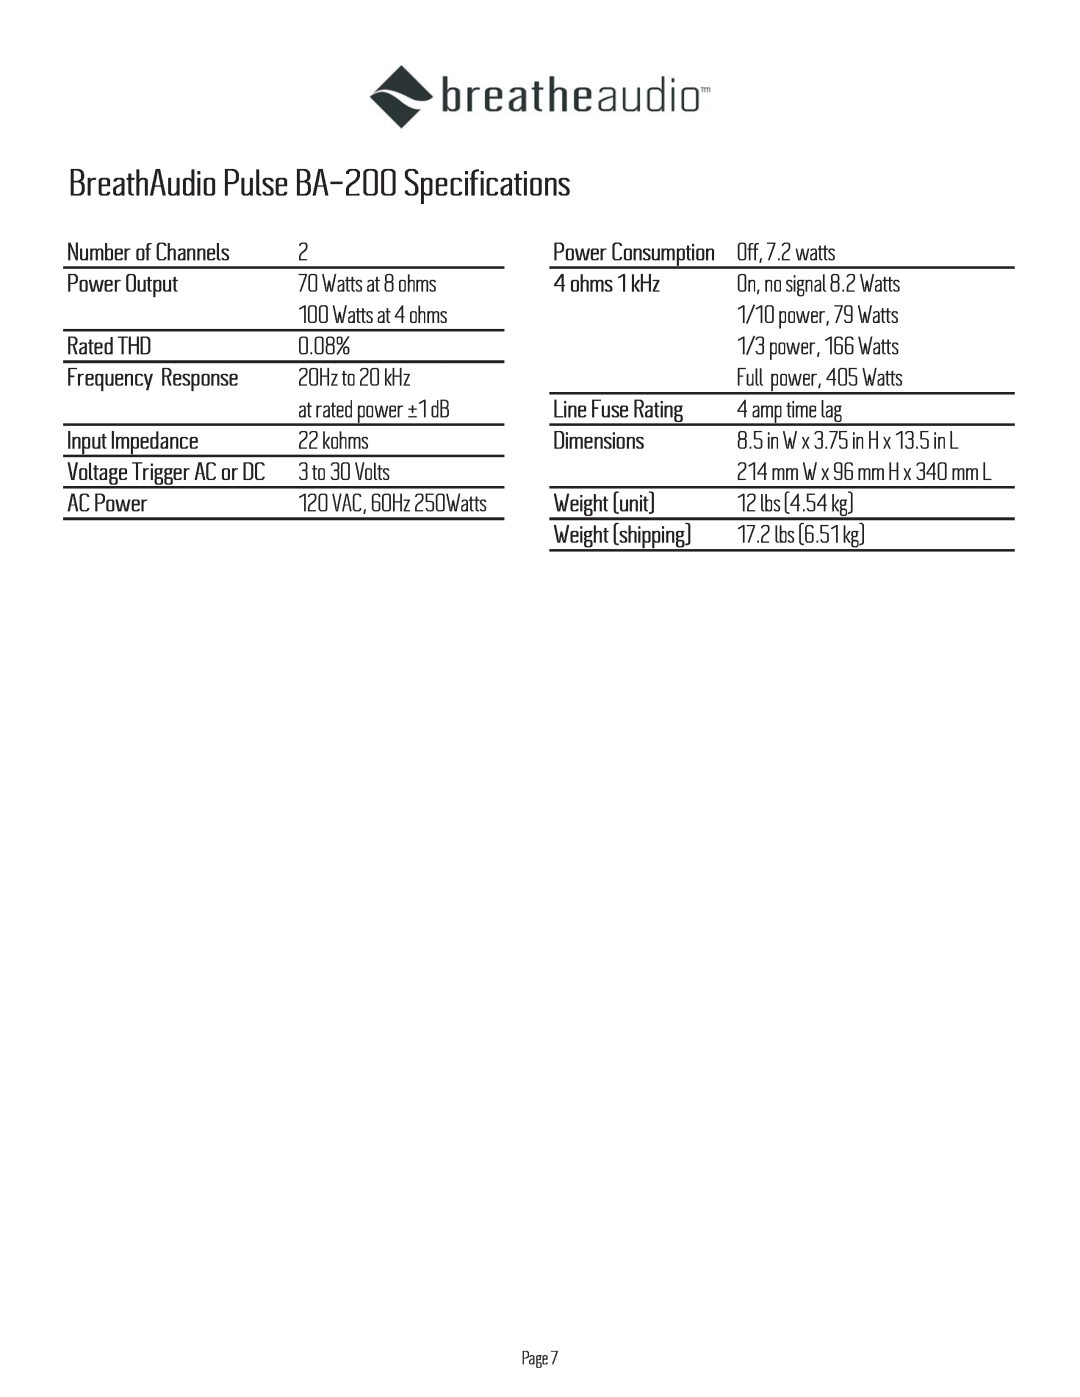 BreatheAudio BreathAudio Pulse BA-200Specifications, Power Output, Rated THD, Input Impedance, AC Power, ohms 1 kHz 